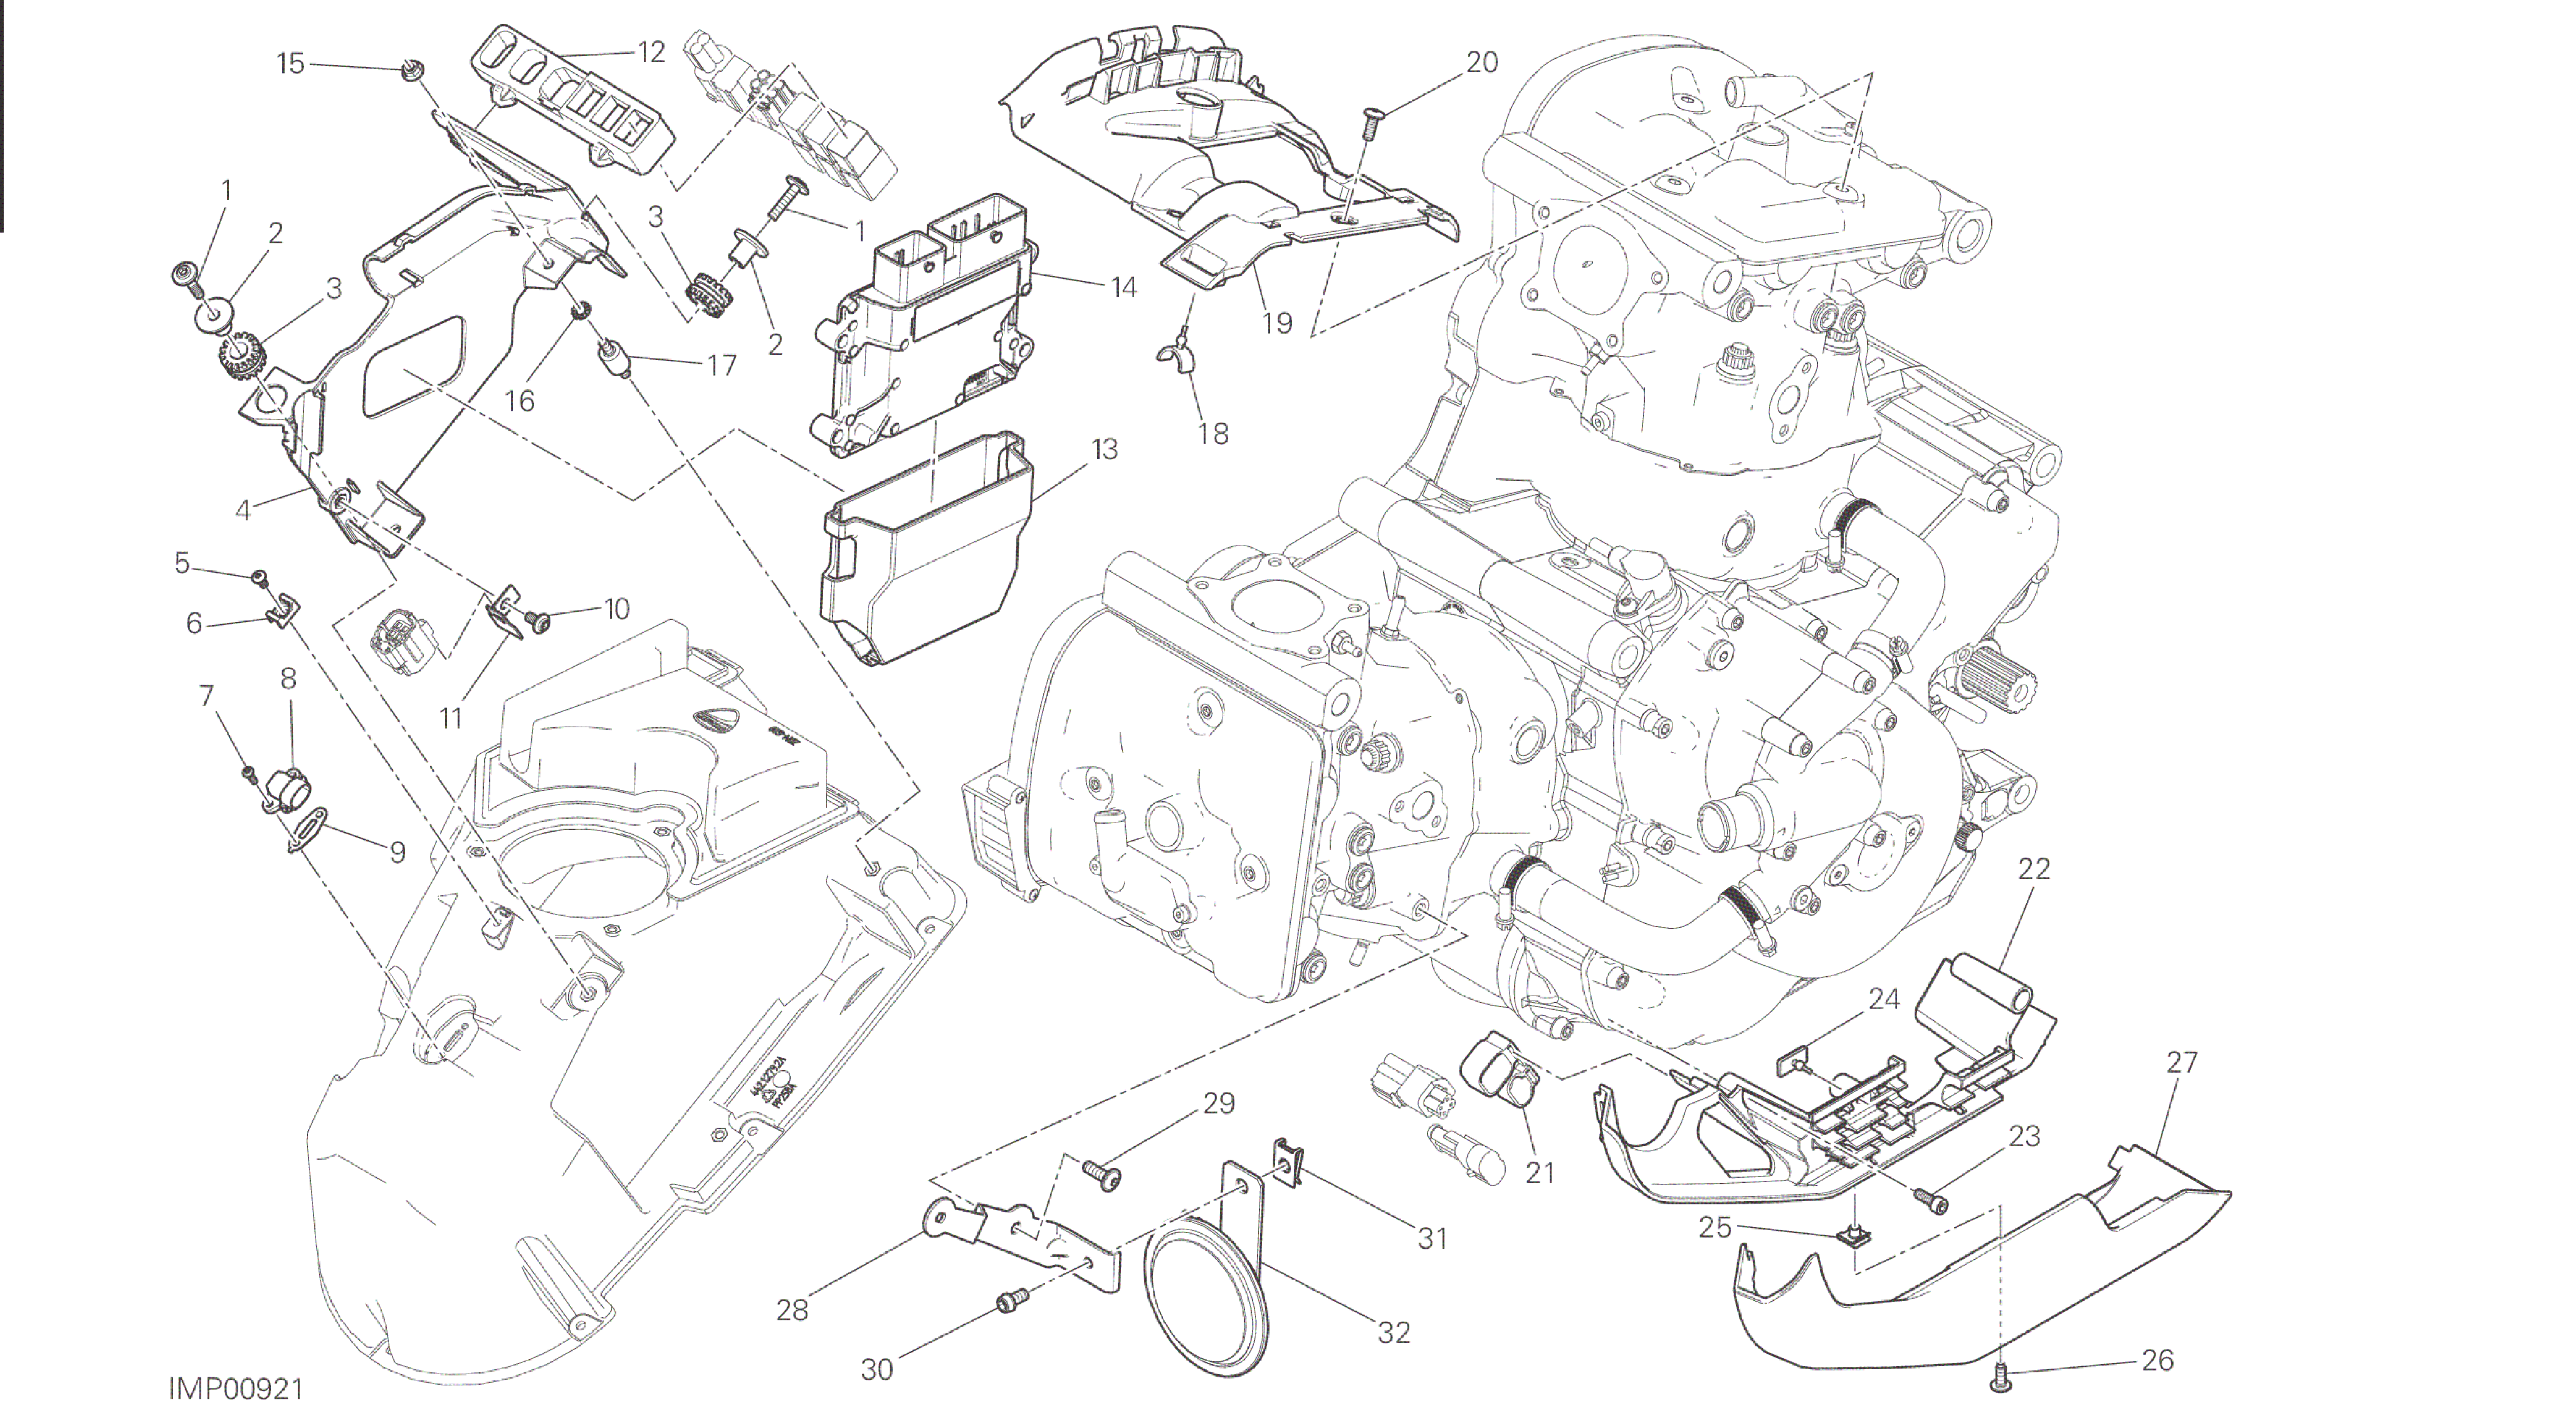 DRAWING 18A - ENGINE CONTROL UNIT [MOD:M 821]GROUP ELECTRIC